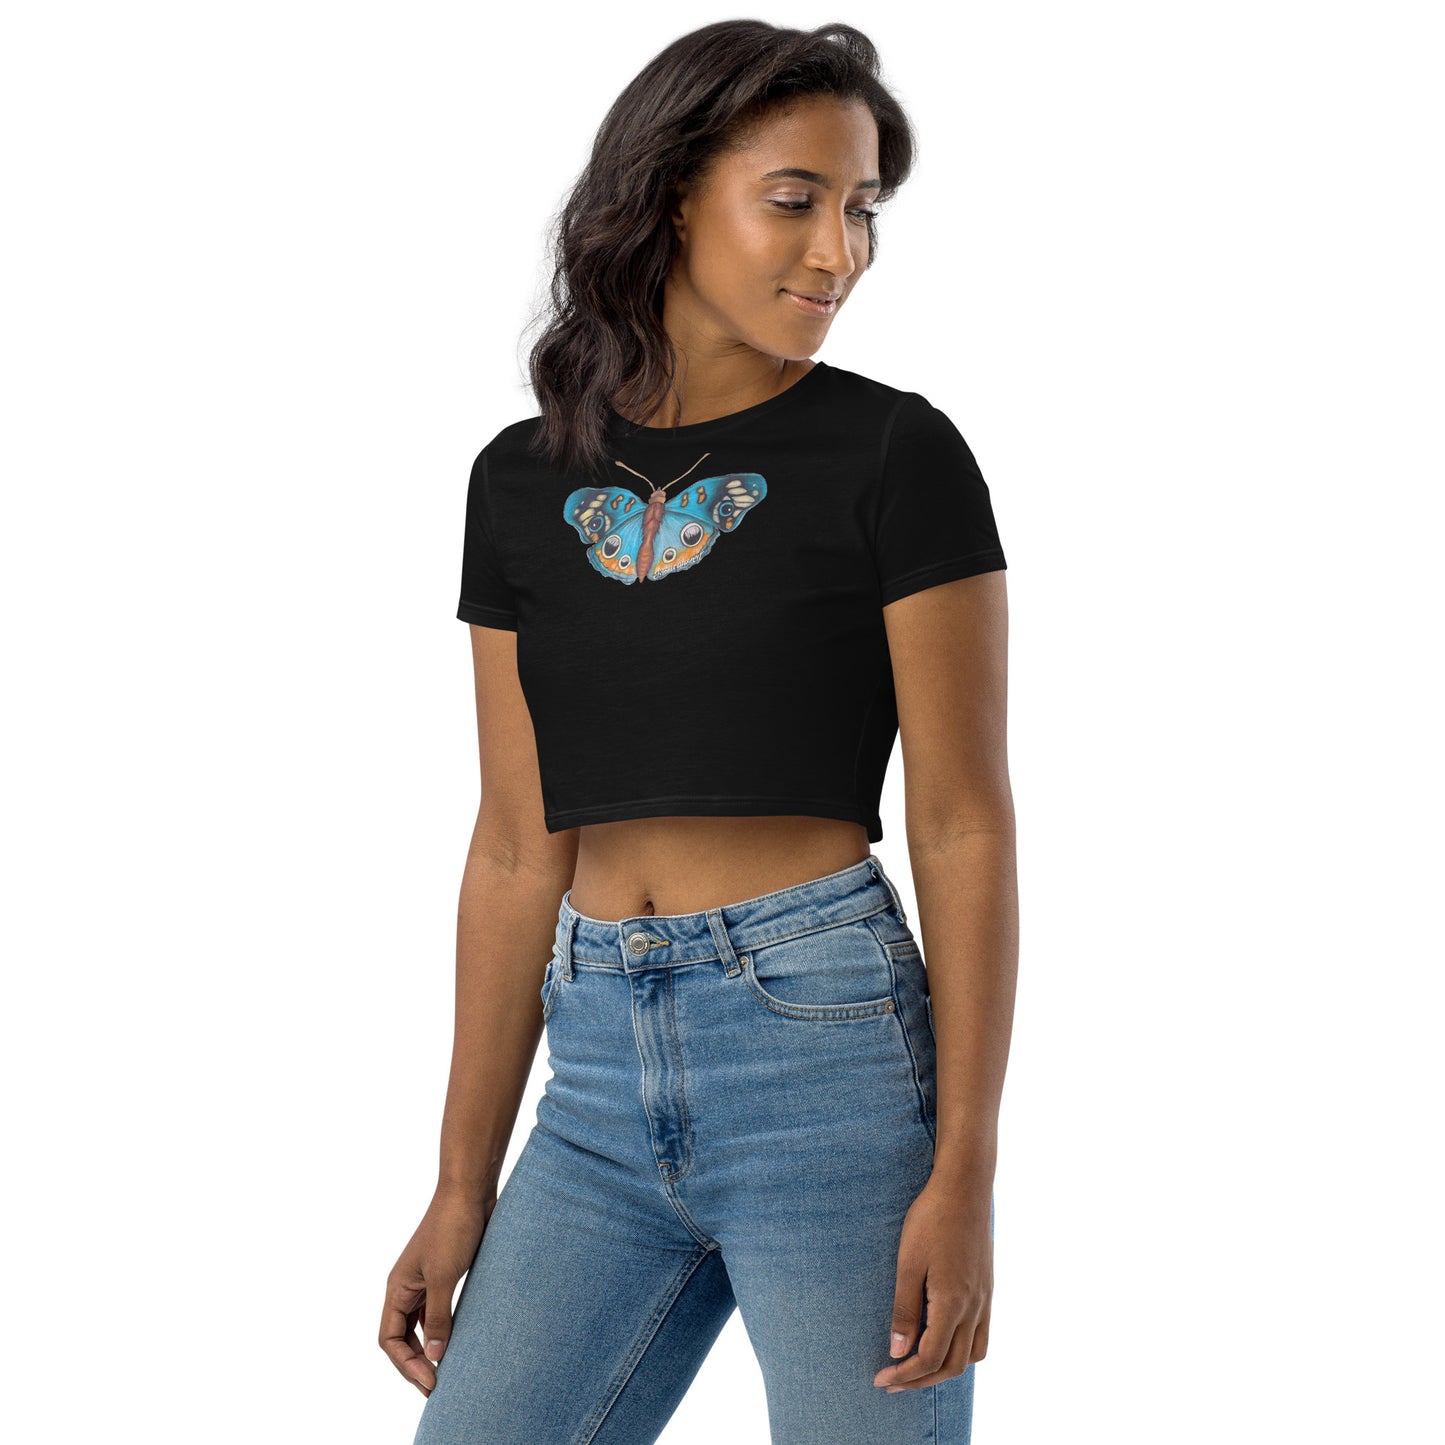 🦋 Butterfly Crop top Shirt - Baby Blue's Code & Price - RblxTrade